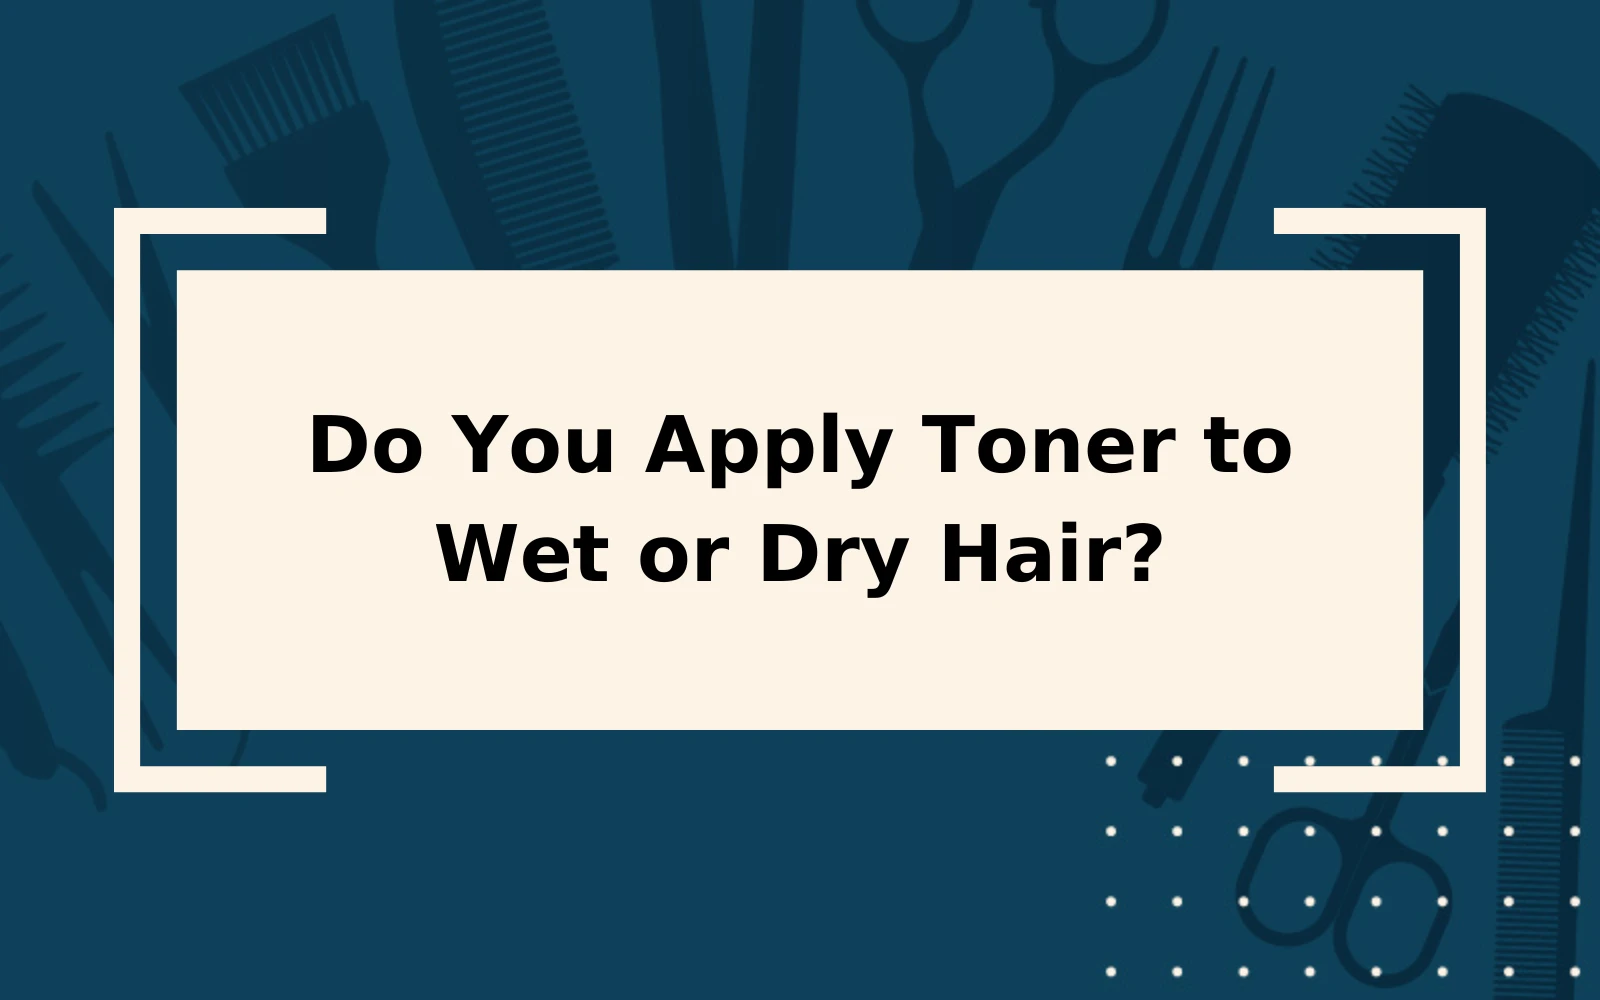 Do You Apply Toner to Wet or Dry Hair? | It's Simple!